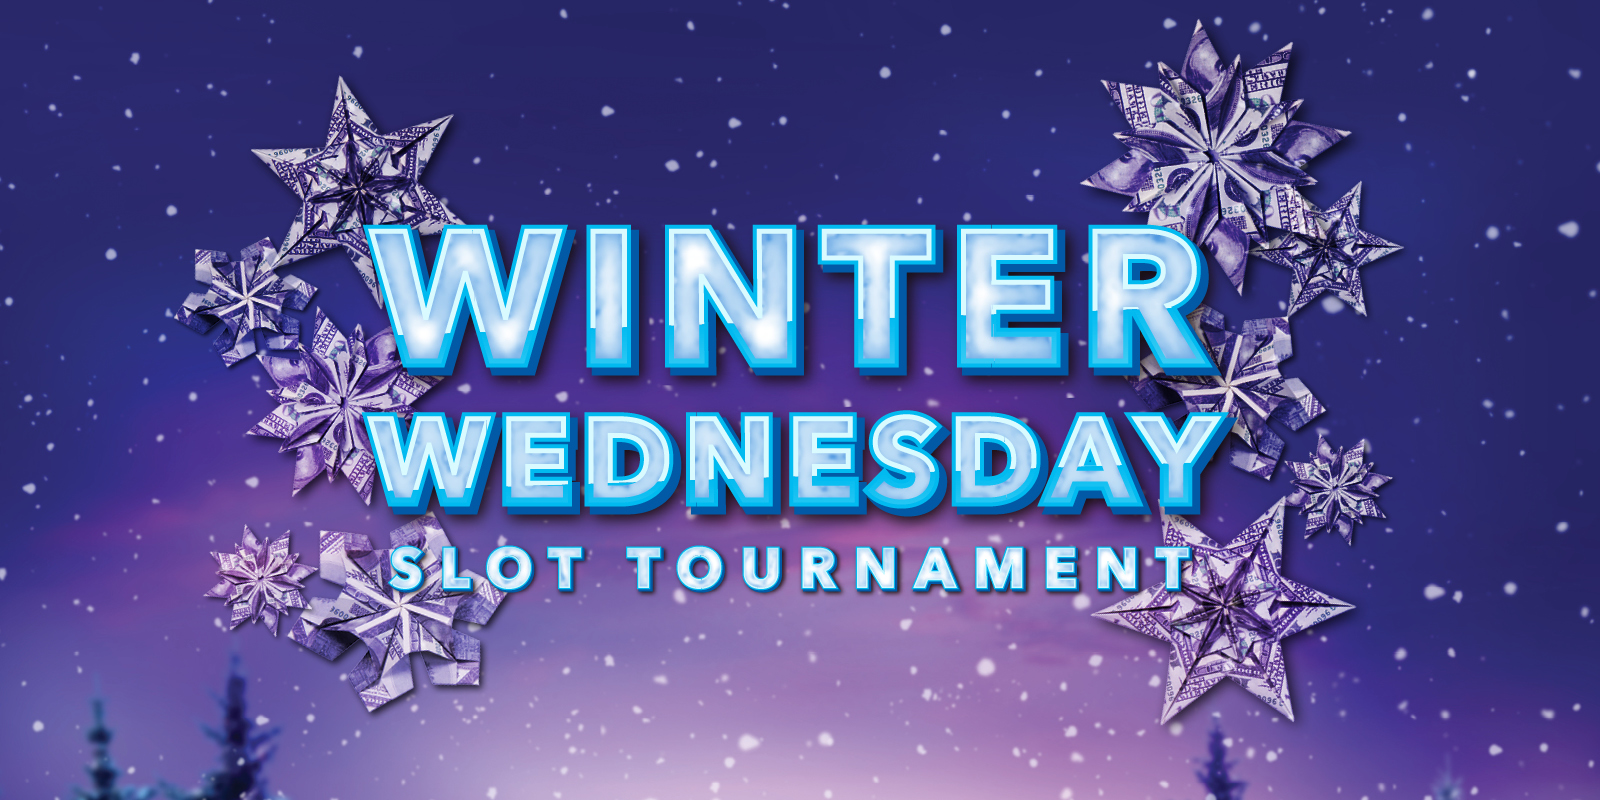 Winter Wednesday Slot Tournament copy against a wintery backdrop of snowflakes and pine trees